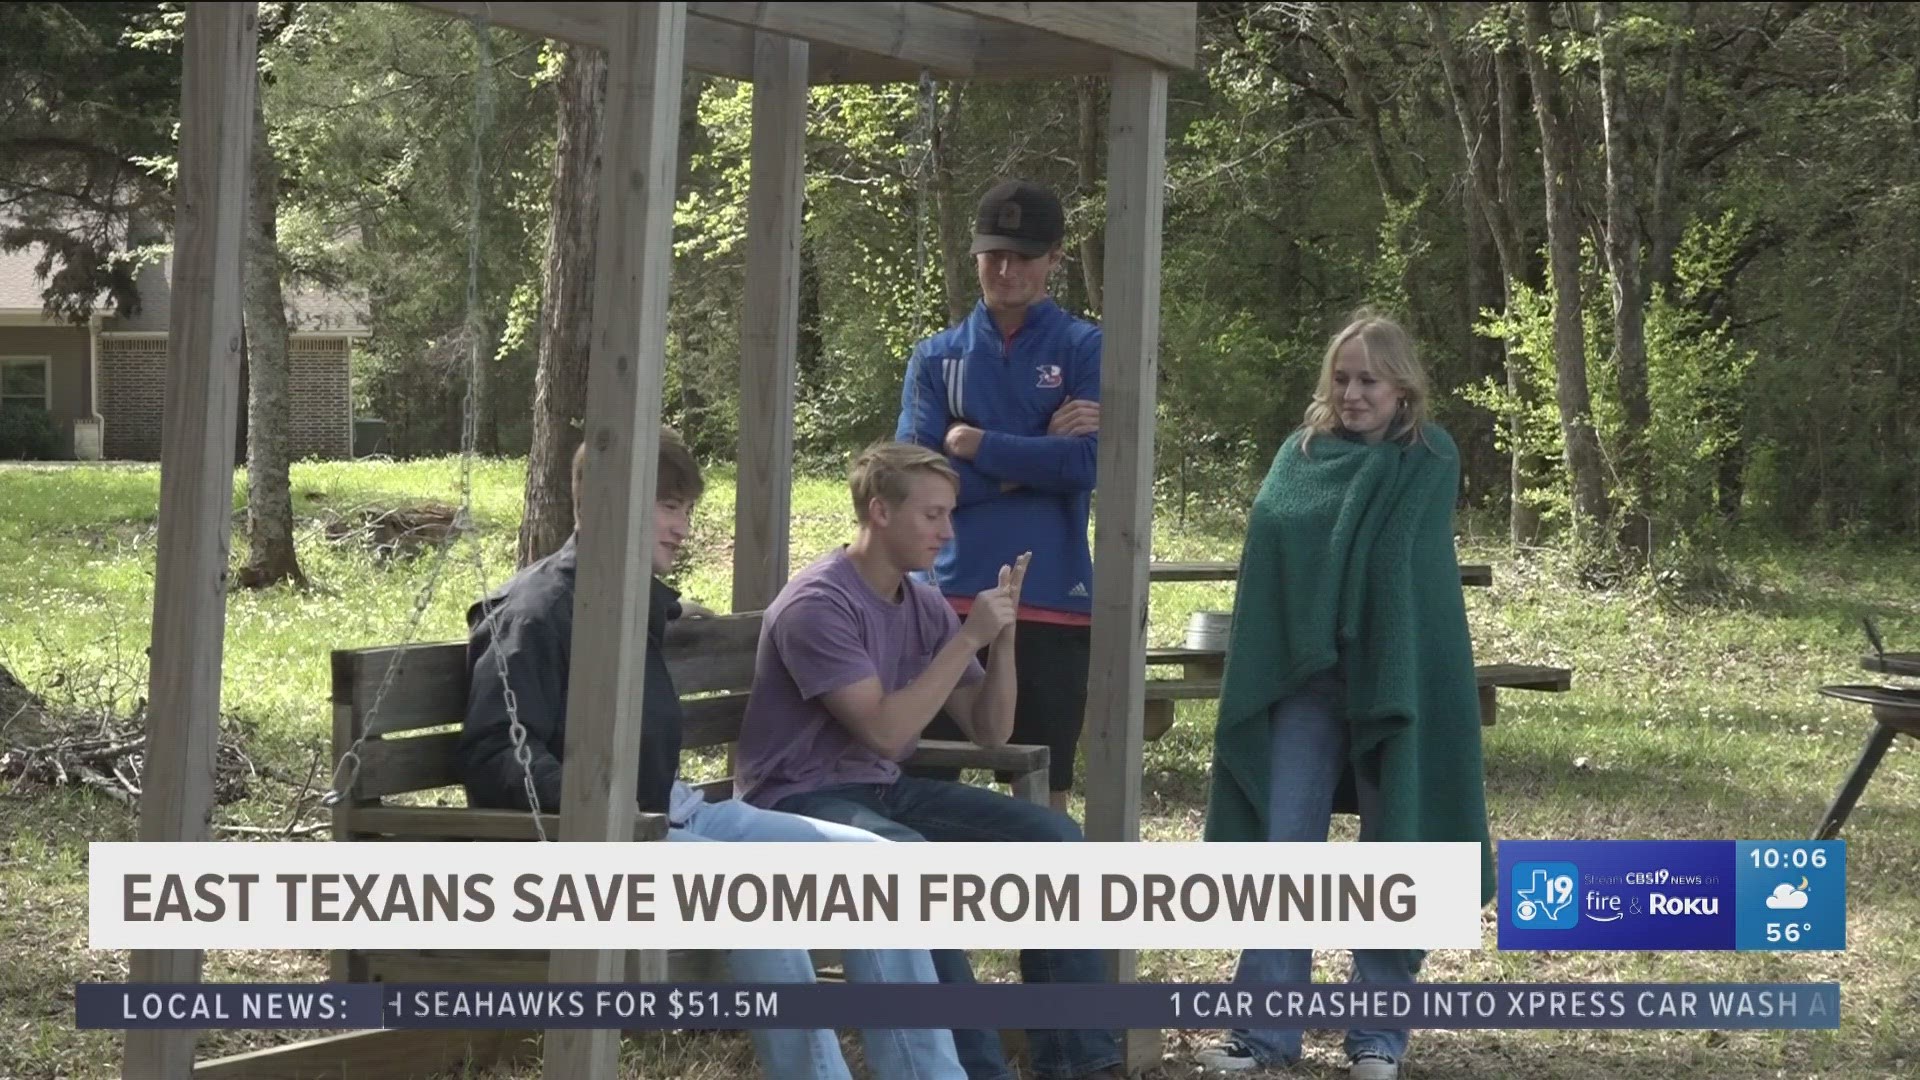 After flipping their vehicle upside-down in a pond, four teenagers along with other residents were able to flip the car over and save the driver's life.